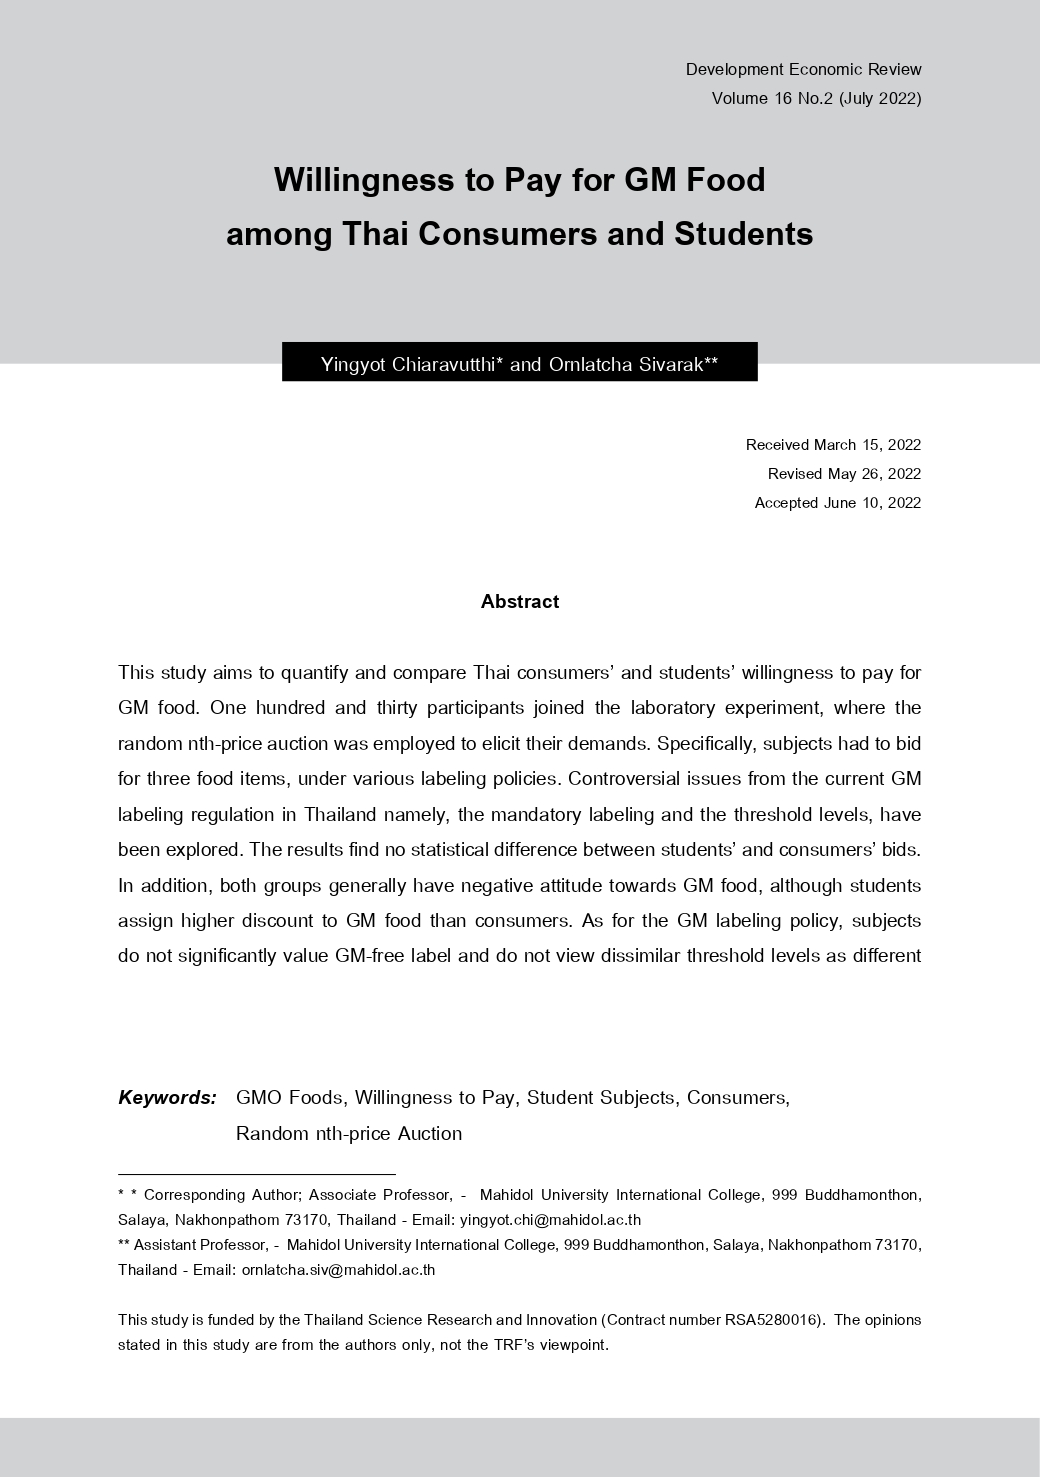 Willingness to Pay for GM Food among Thai Consumers and Students